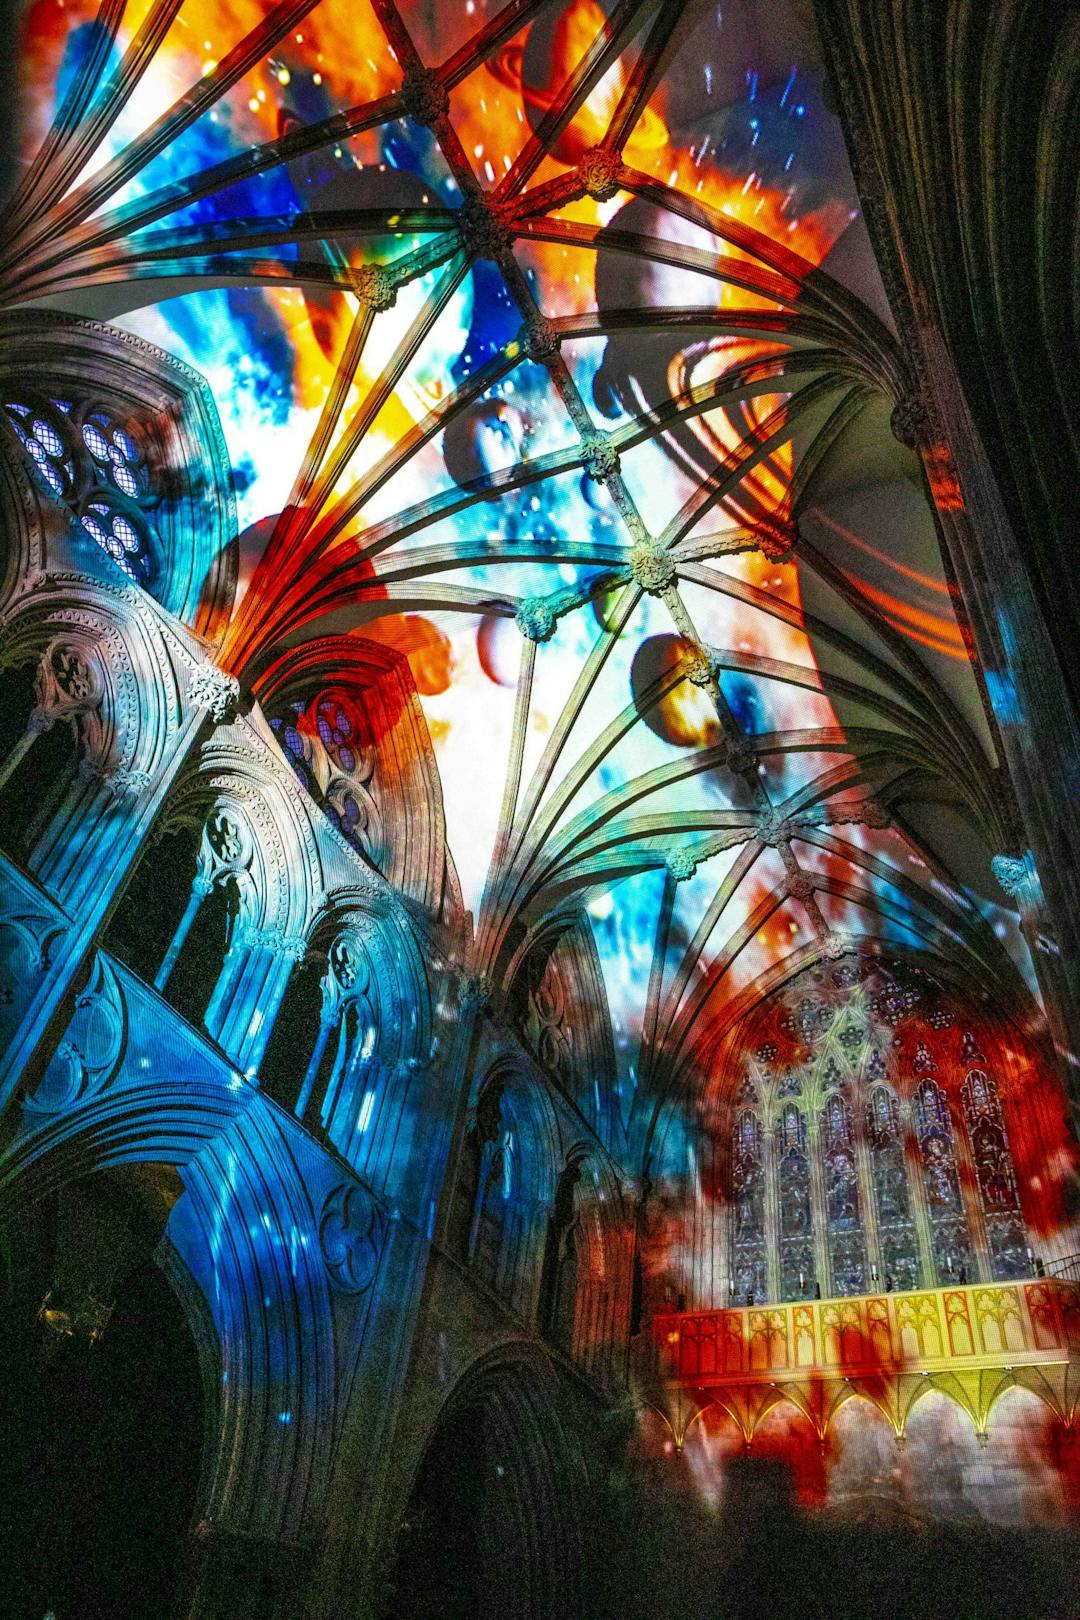 Space Voyage at Southwell Minster - image 1